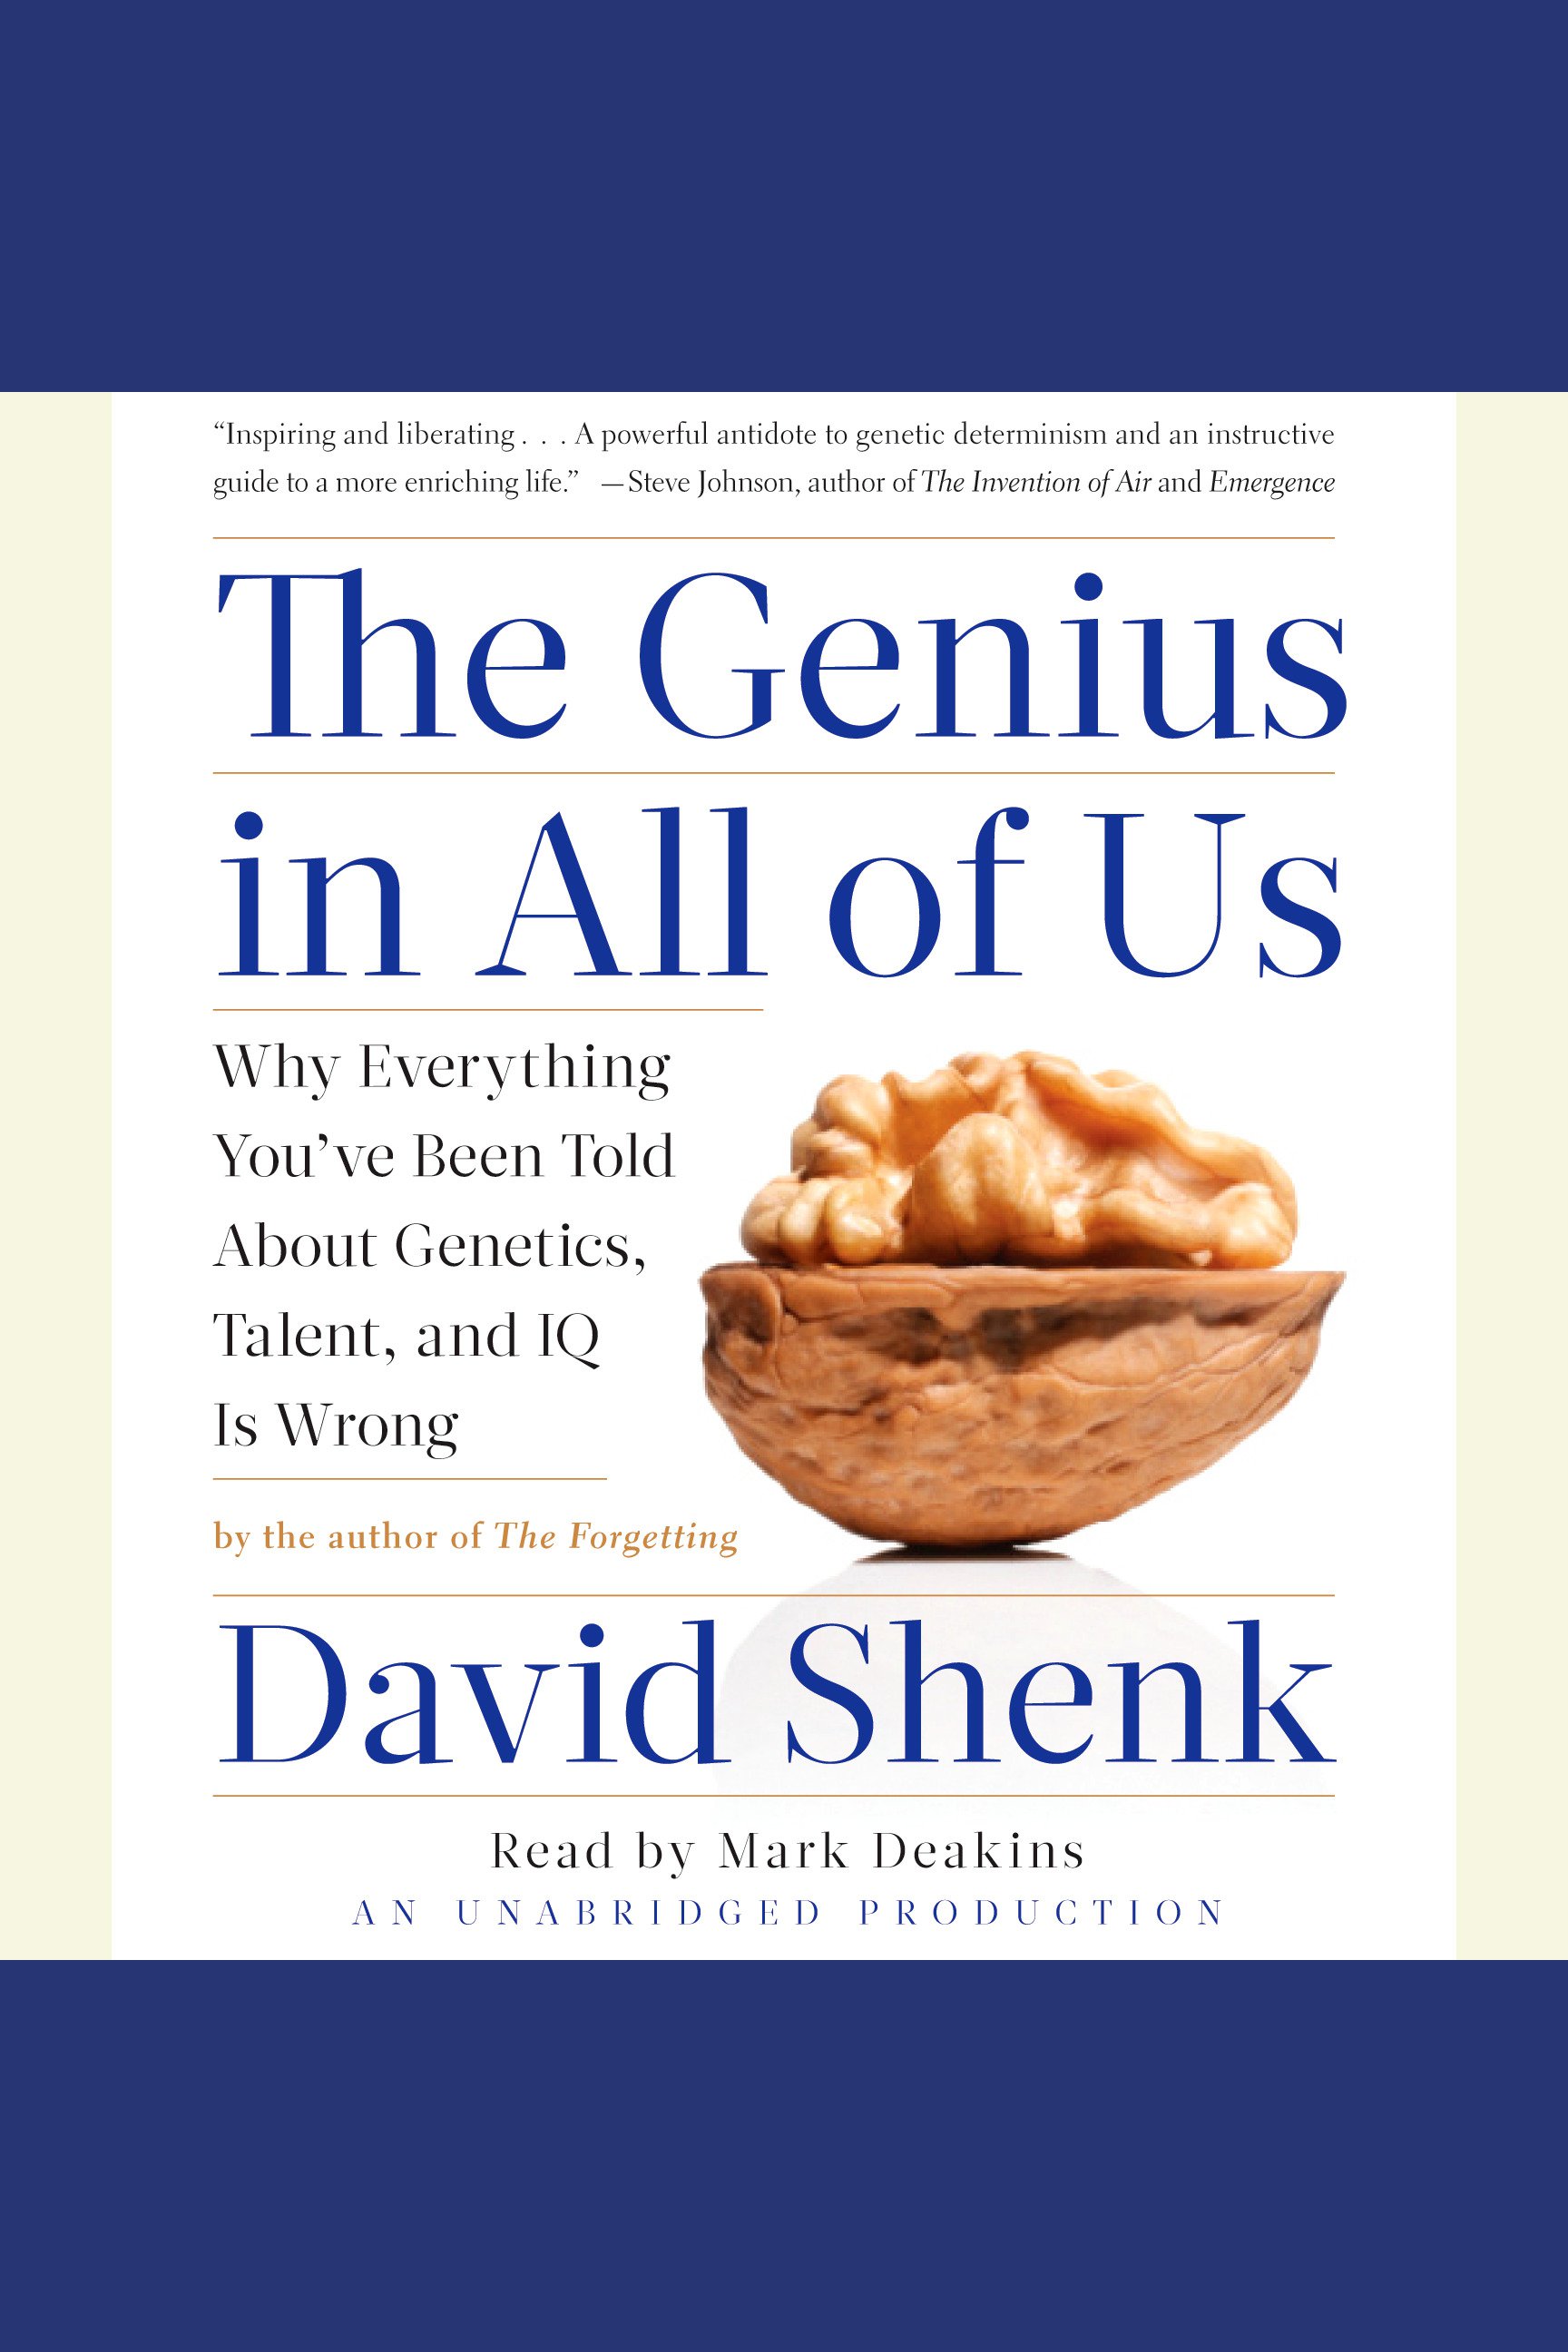 The Genius in All of Us why everything you've been told about genetics, talent, and IQ is wrong cover image